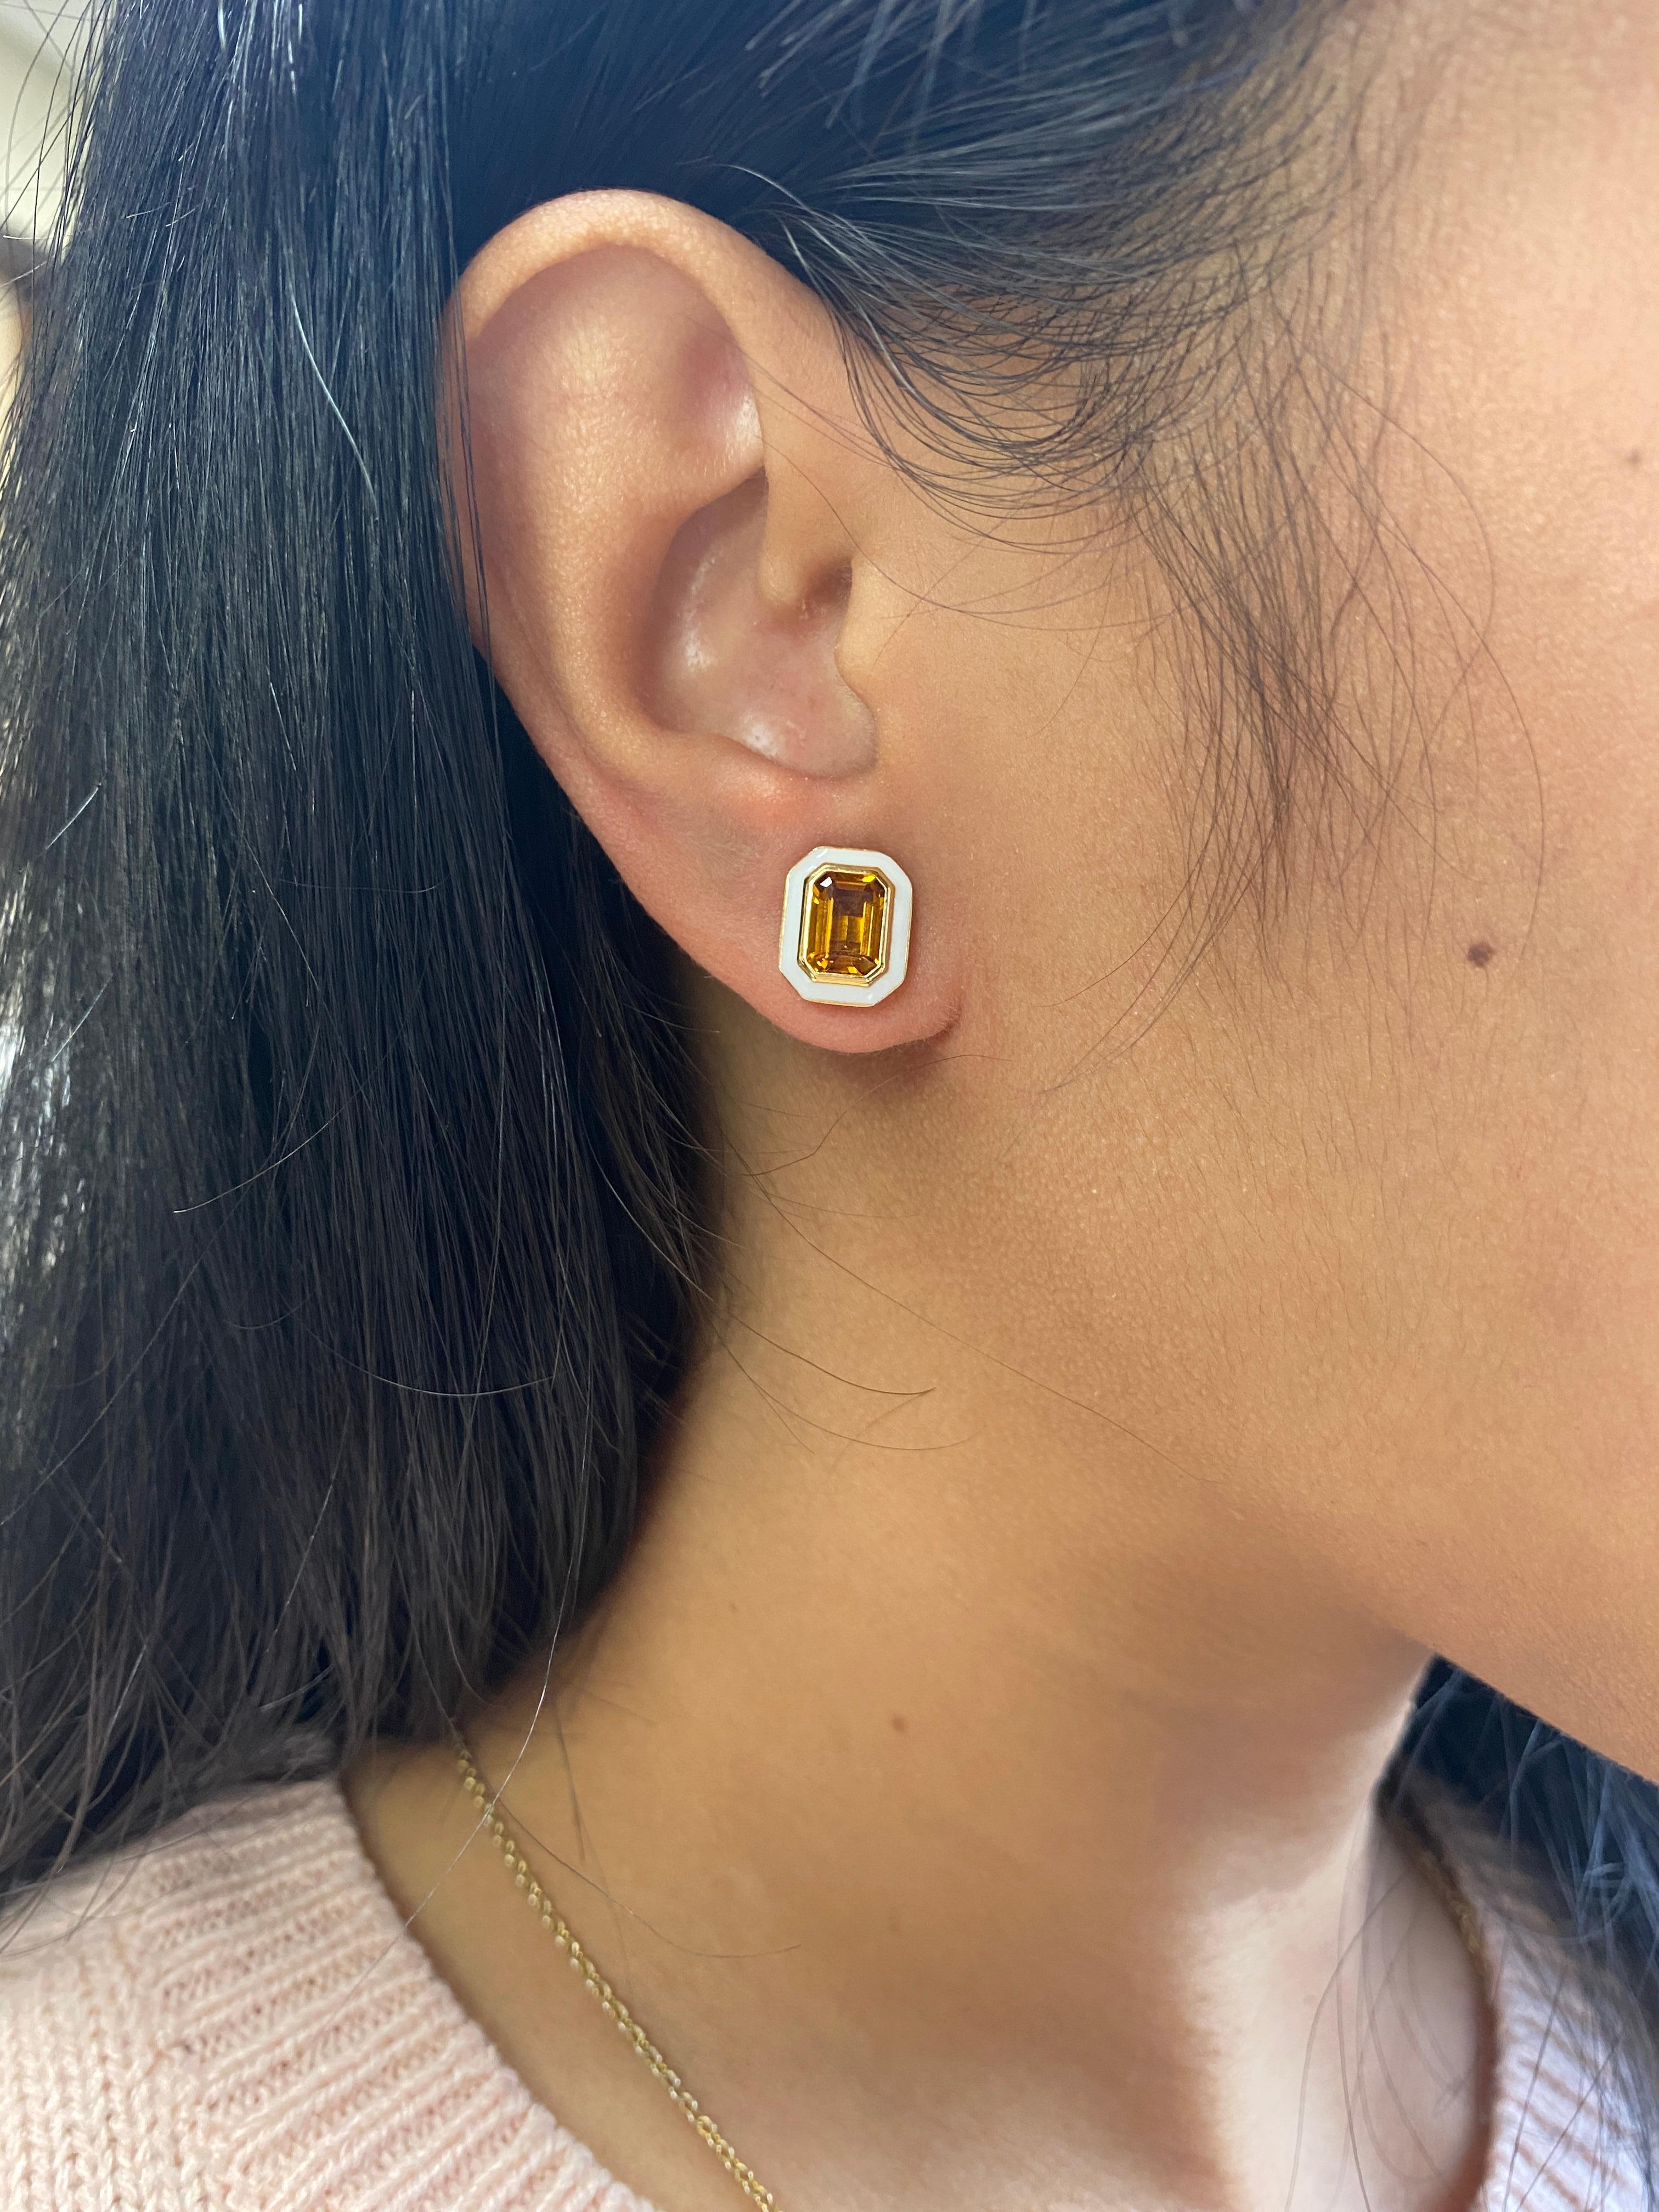 These earrings are a unique combination of Citrine and White enamel. If you want to make a statement these are the perfect earrings to do it!

A pair of 7 x 5 mm Citrine Emerald Cut studs earrings with White enamel. The studs have posts and are held